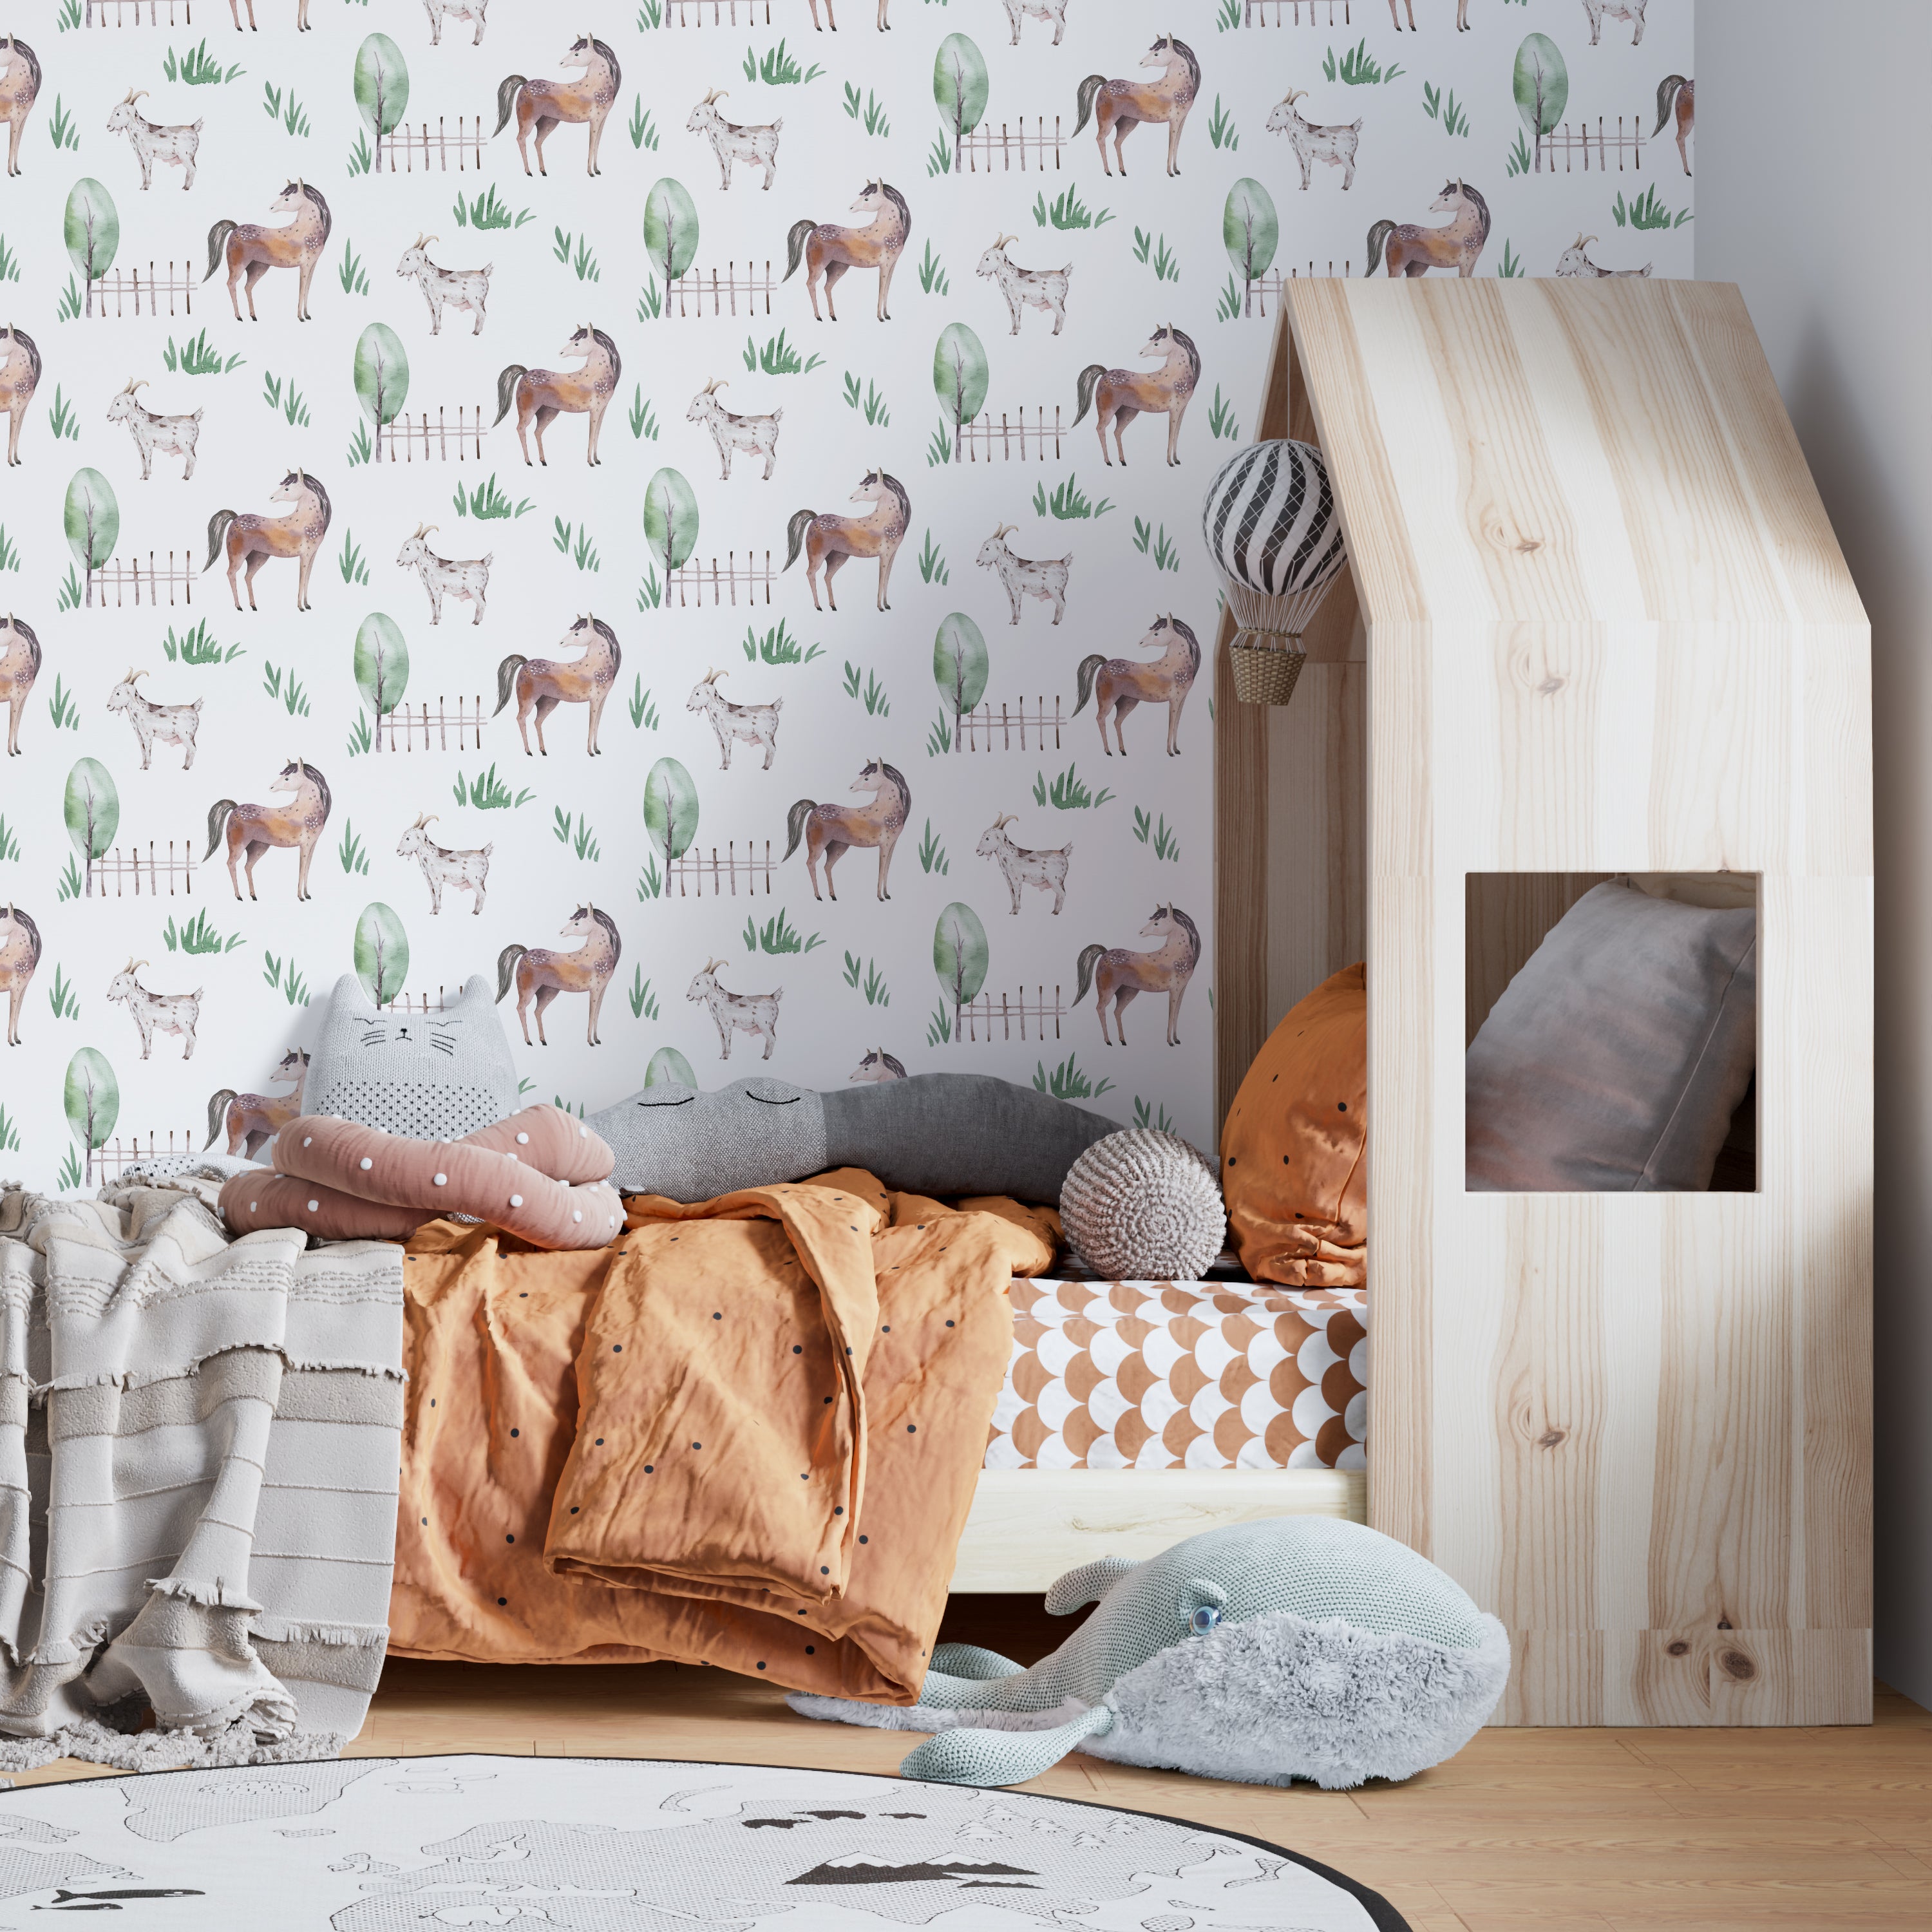 A child's bedroom wall covered with 'Watercolor Farm Animals V' wallpaper, showing pastoral scenes with horses and goats, green trees, and wooden fences, creating a tranquil farm-inspired atmosphere